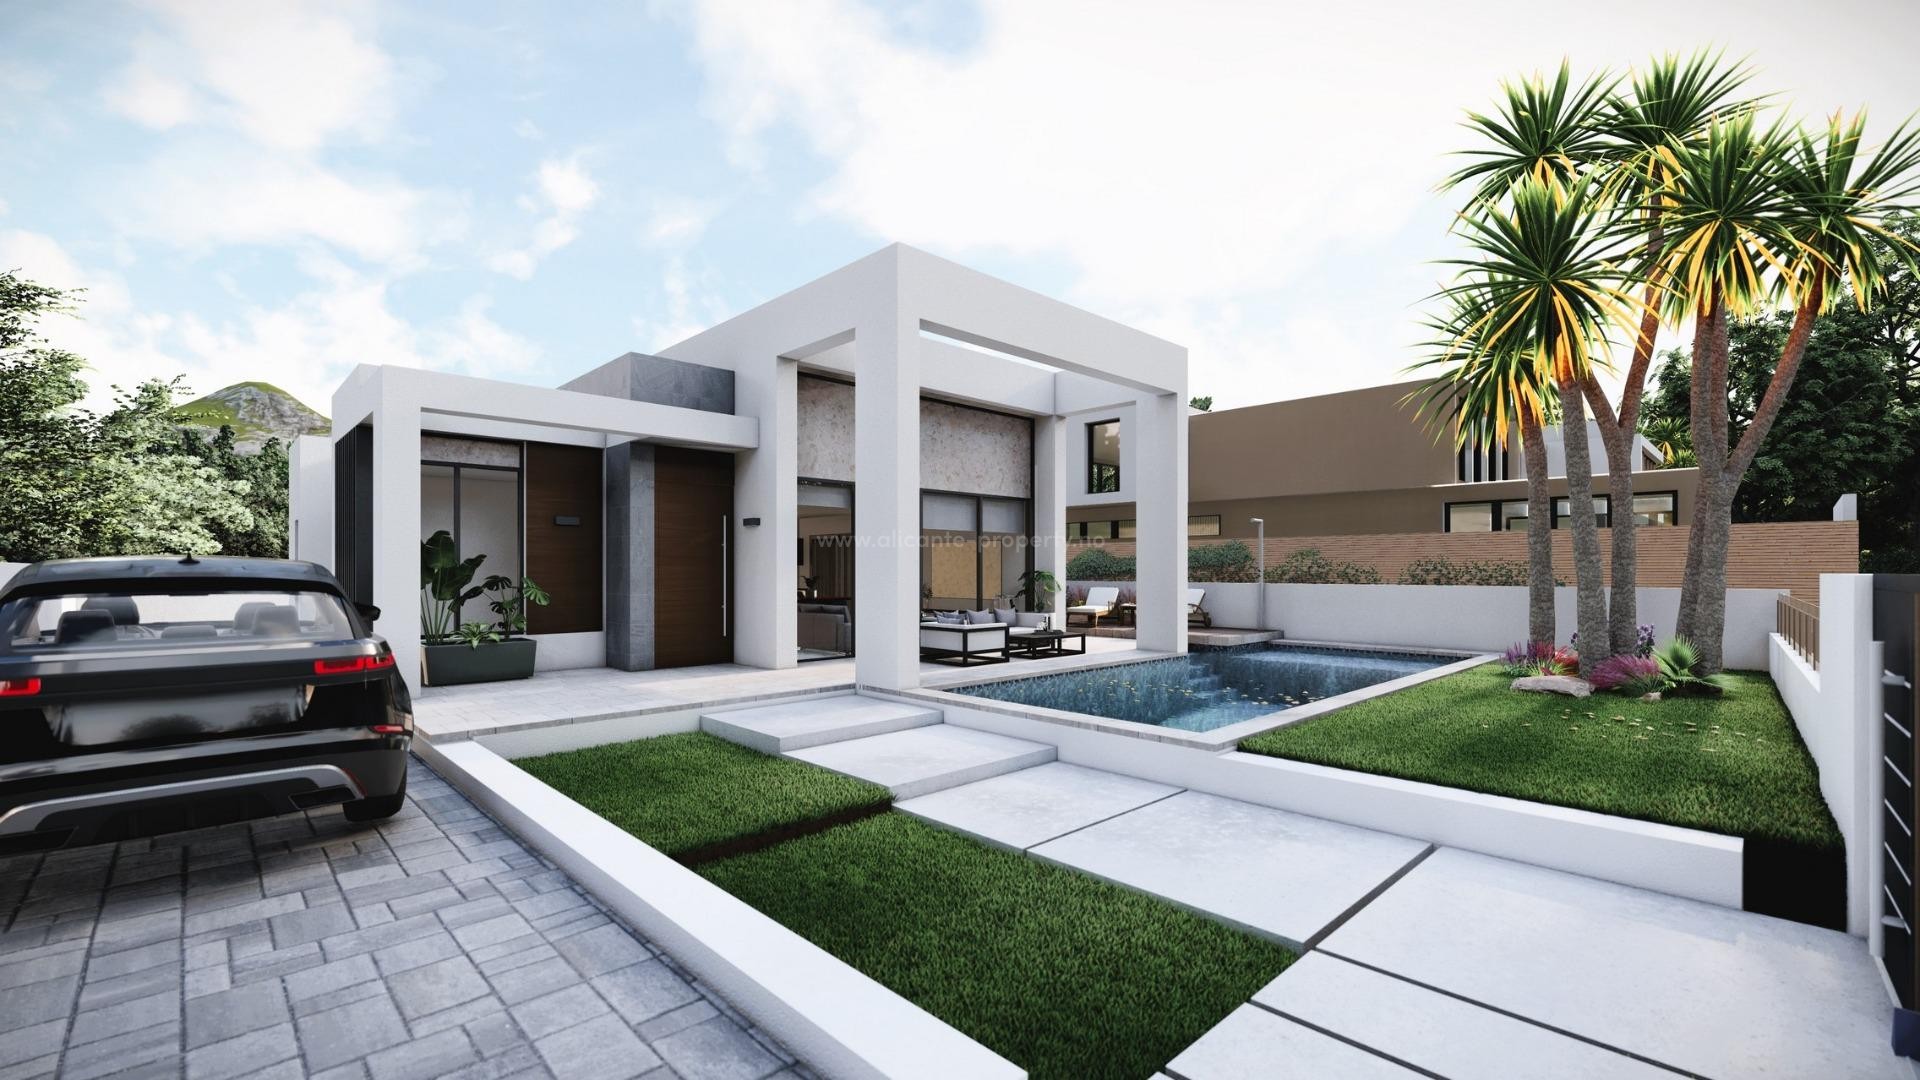 New built modern villa in Dona Pepa, Rojales, 3 bedrooms, 2 bathrooms, private garden with pool, terrace, cellar and parking